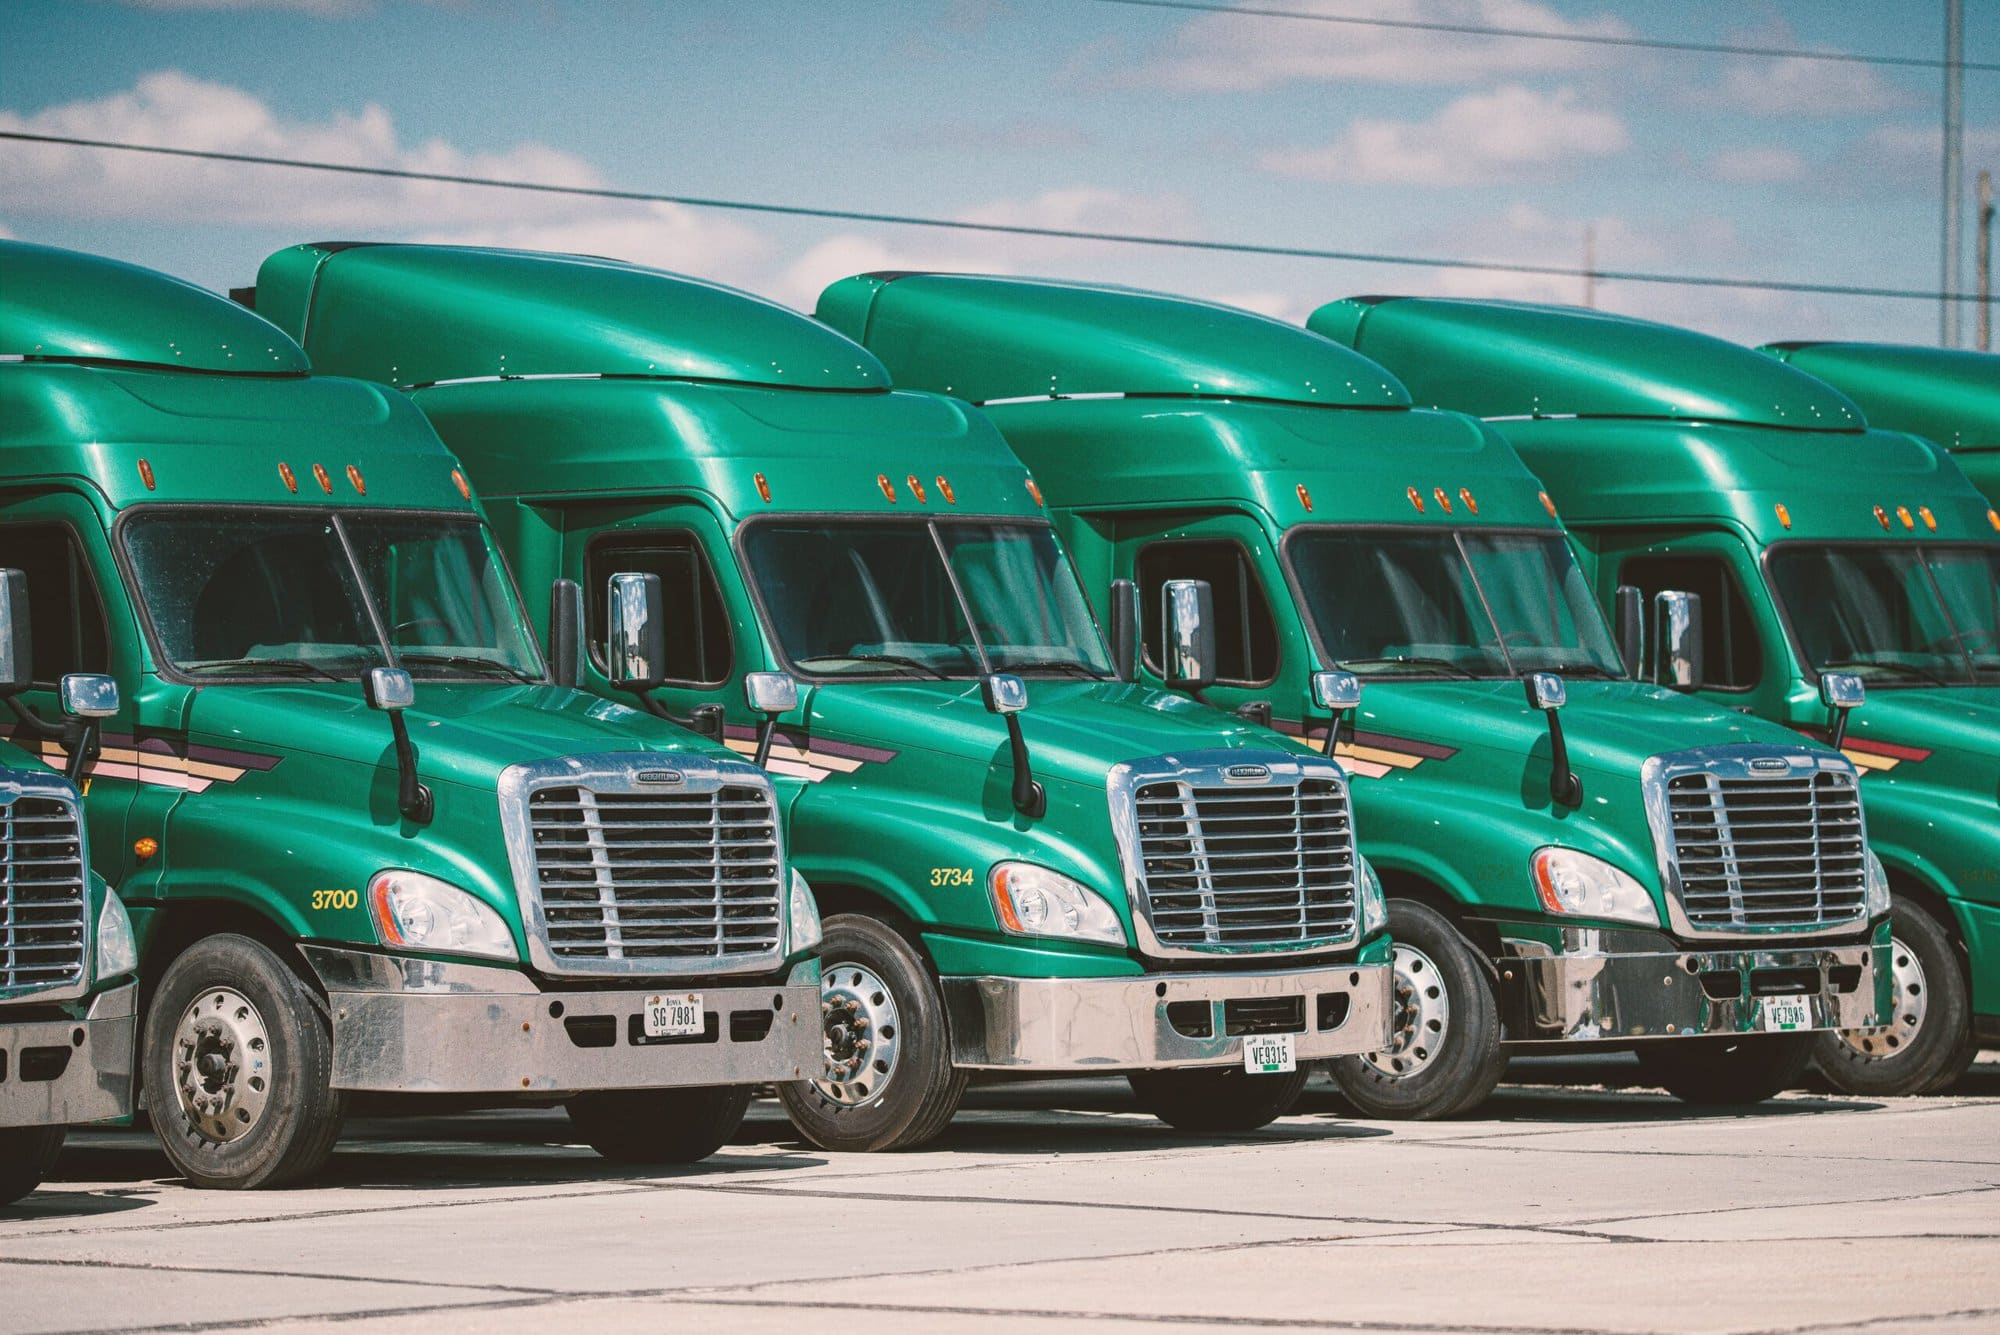 A row of green semi trucks parked in a parking lot equipped with GPS tracker dash cams.